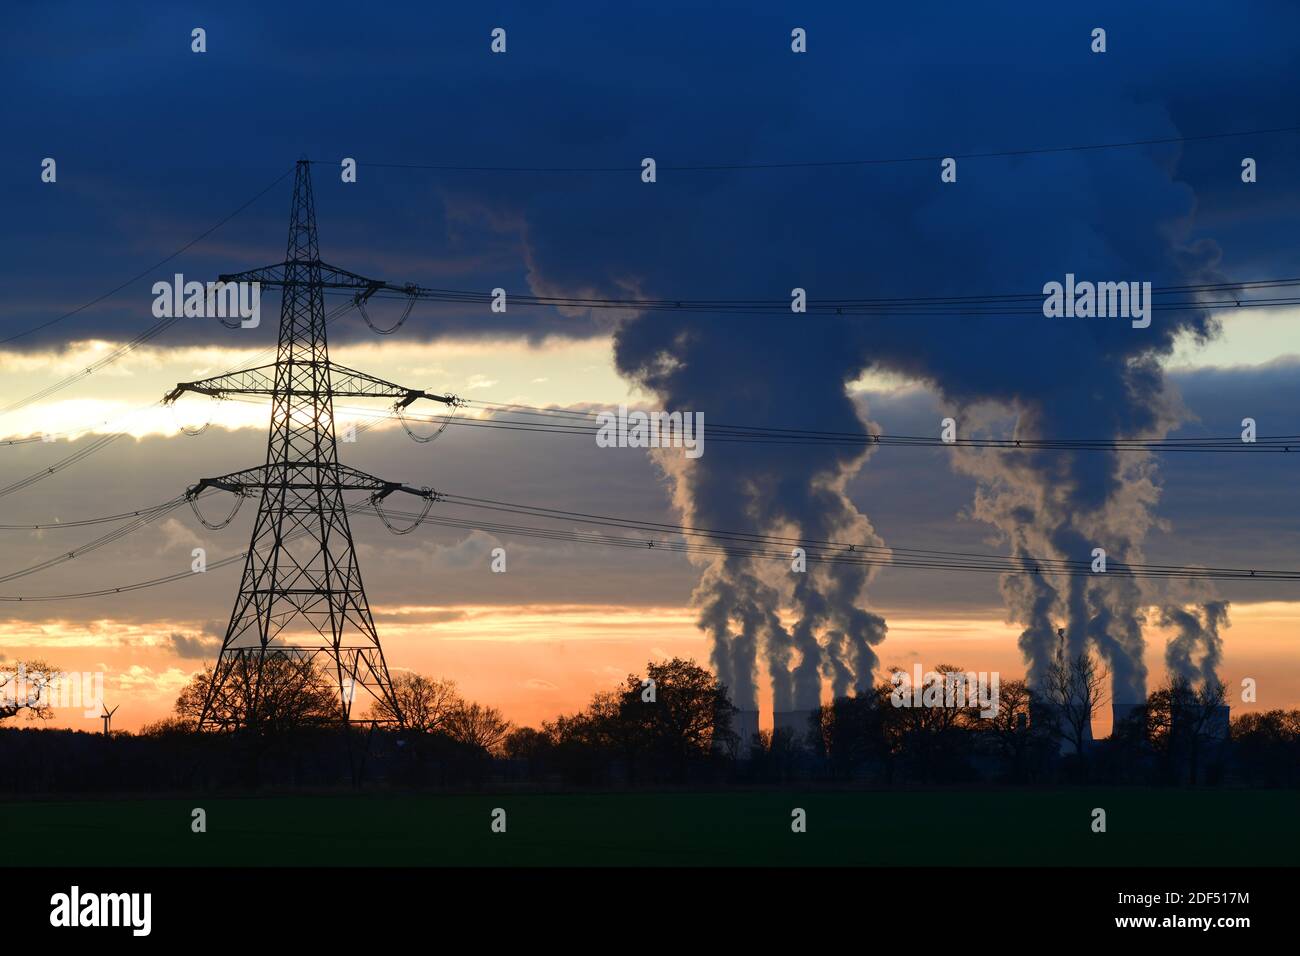 giant cooling towers and electricity pylons at drax power station at sunset united kngdom Stock Photo